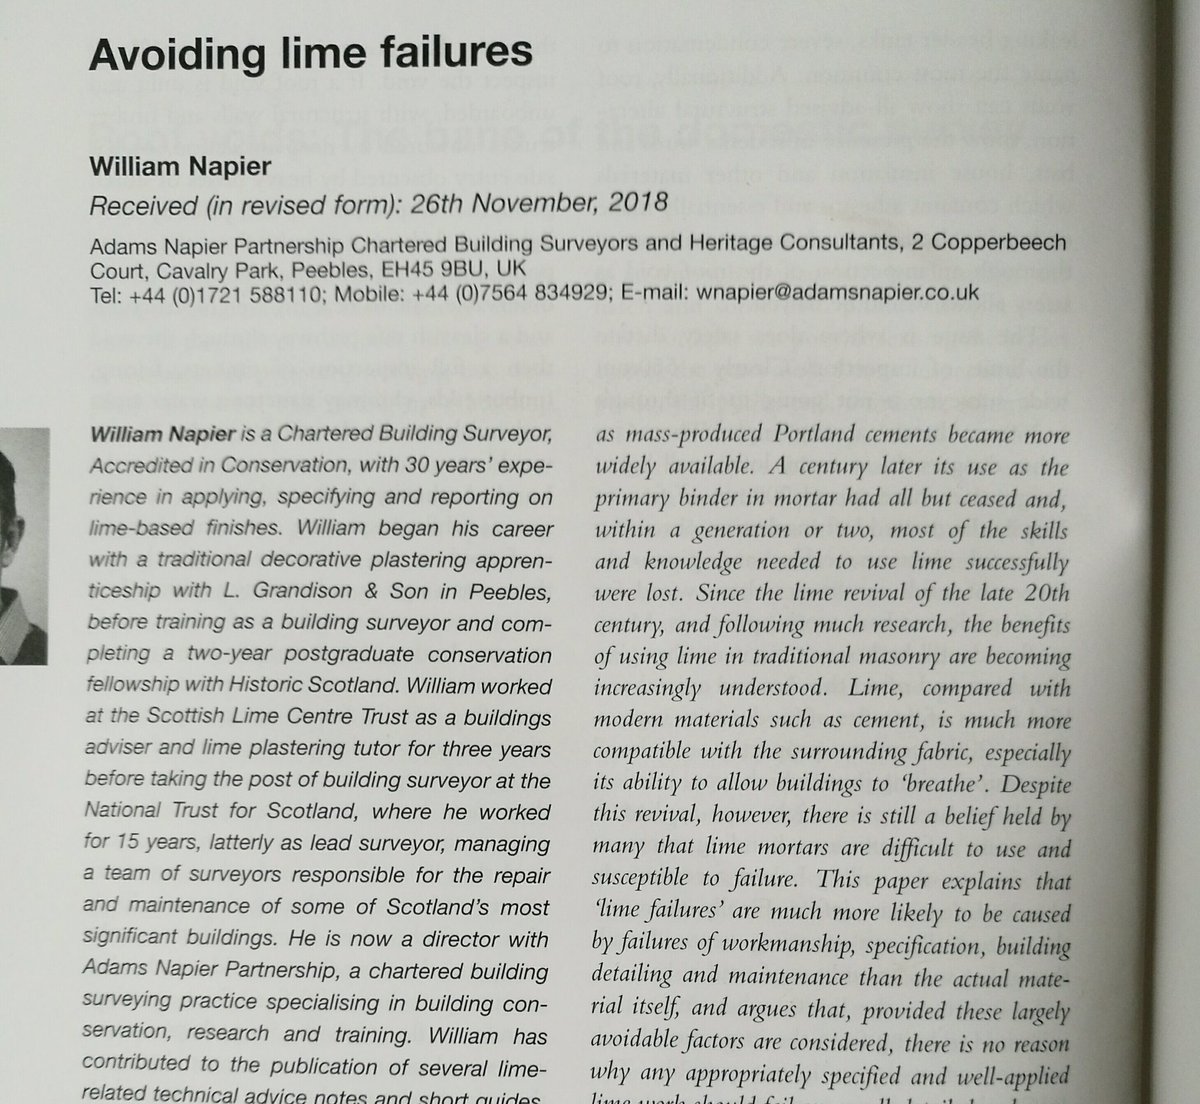 'Avoiding lime failures'
Hot off the press!
Published in the latest volume of the Journal of Building Survey, Appraisal & Valuation. 
Available at lnkd.in/gB6Gucw

 #Lime #limemortar